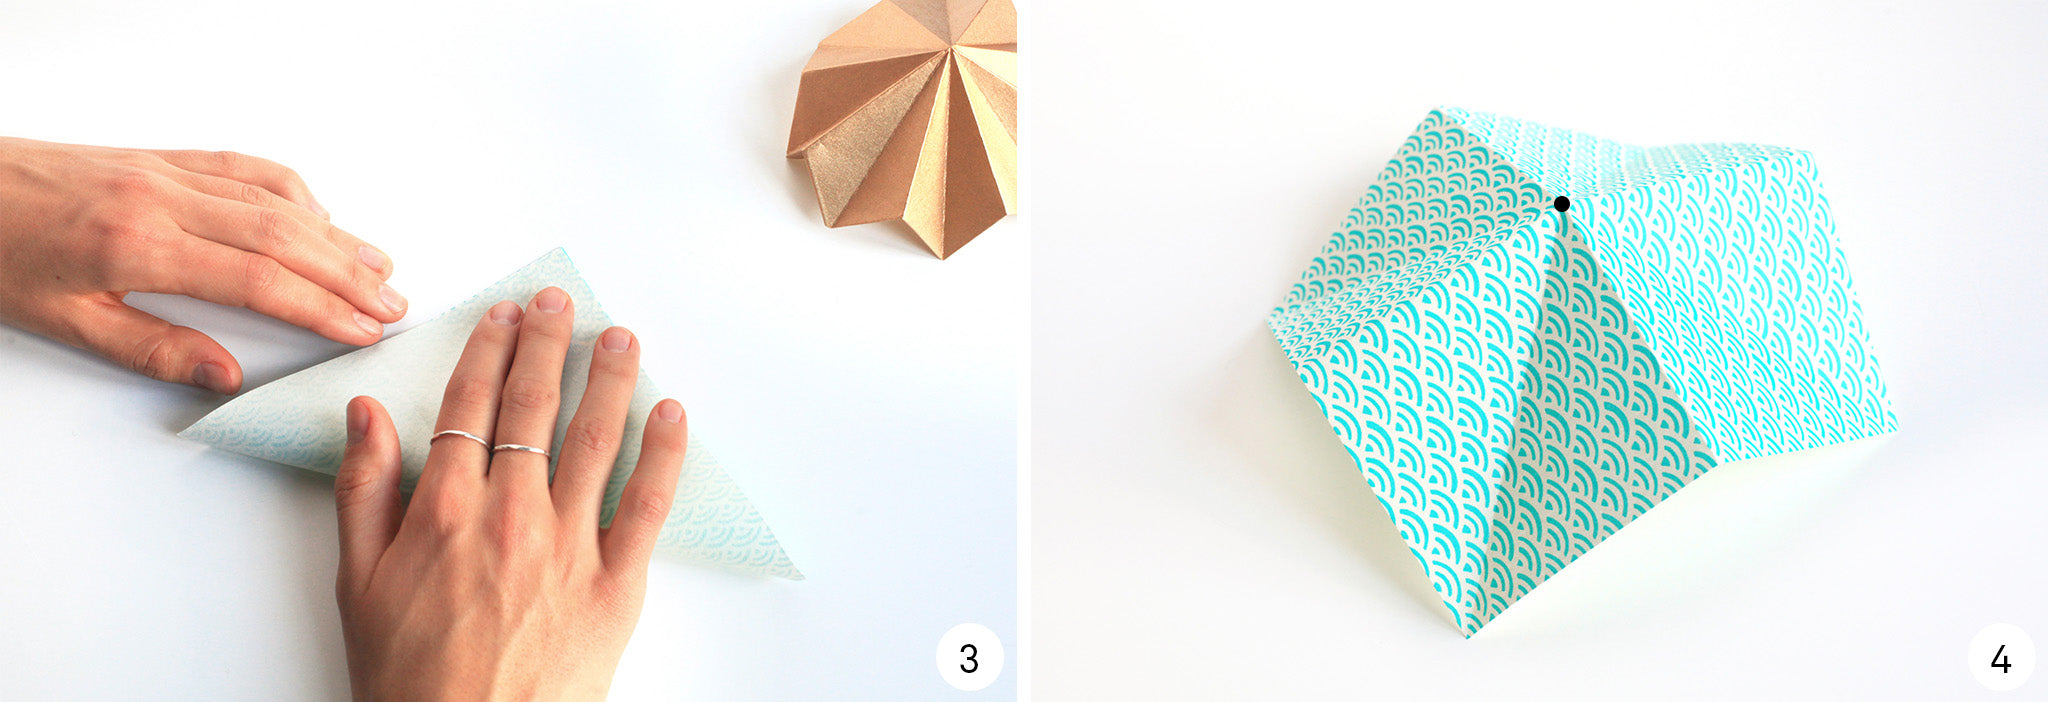 photos-explanations-steps-3-4-article-blog-tuto-pampille-origami-adeline-klam